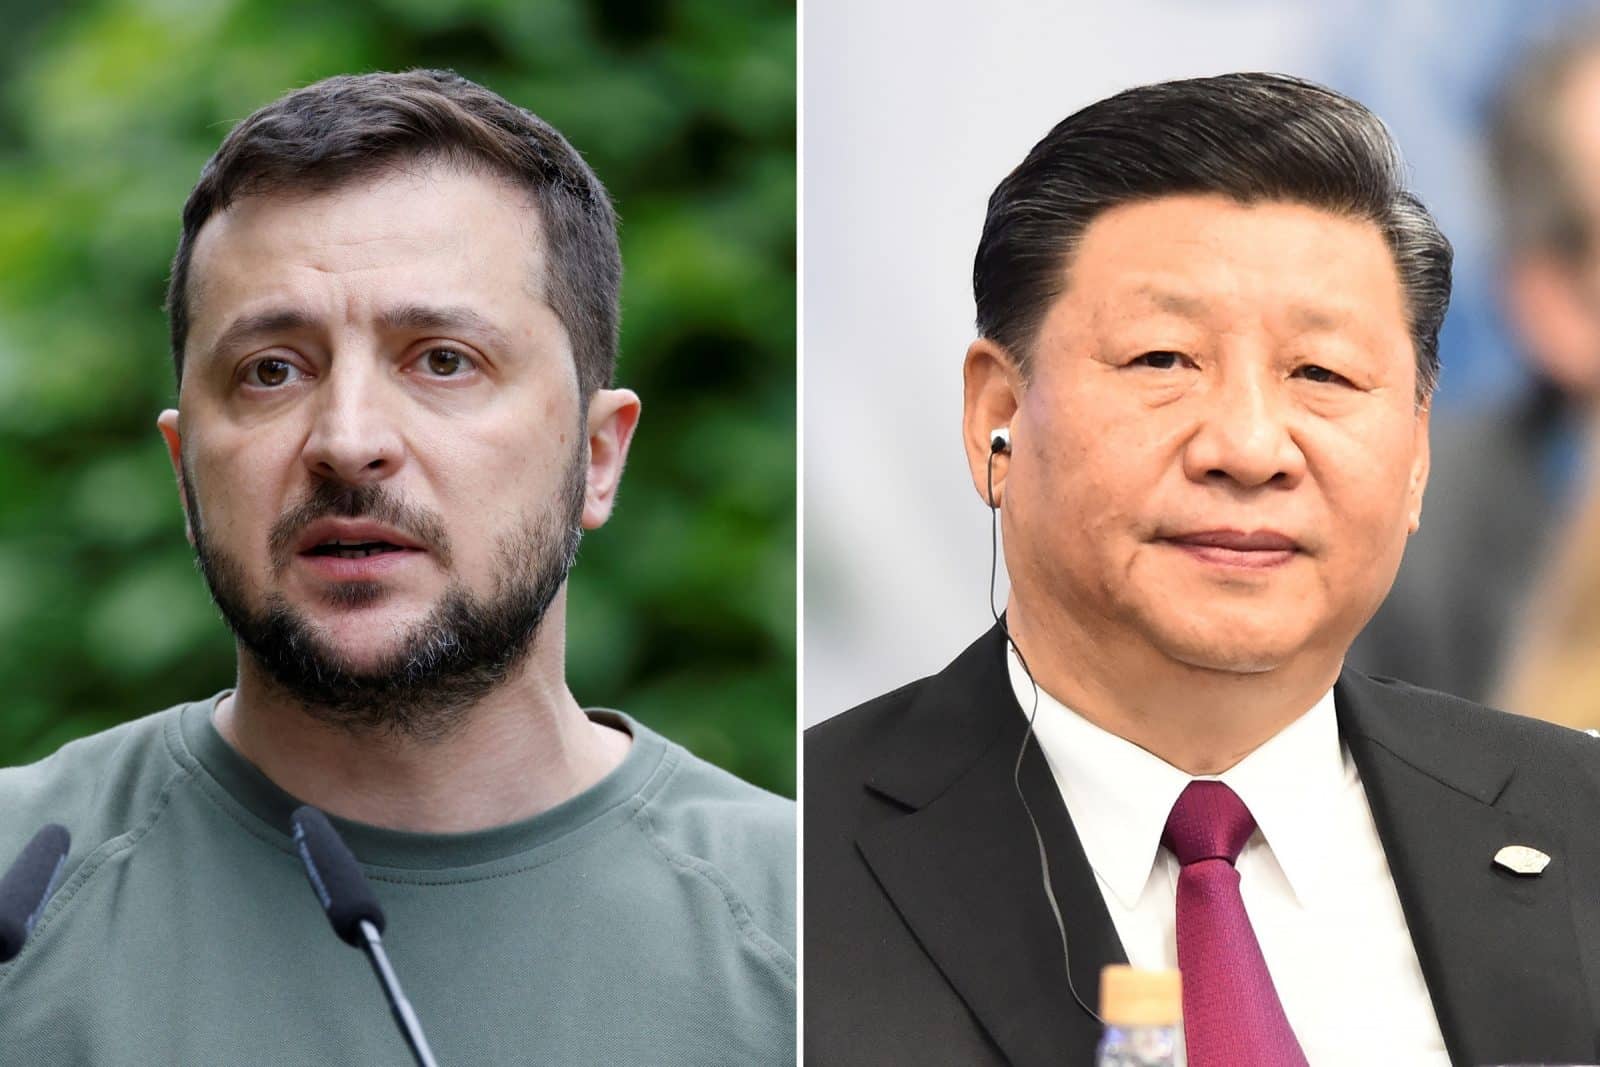 Ukrainian President had a phone call with Chinese President for the first time since war started